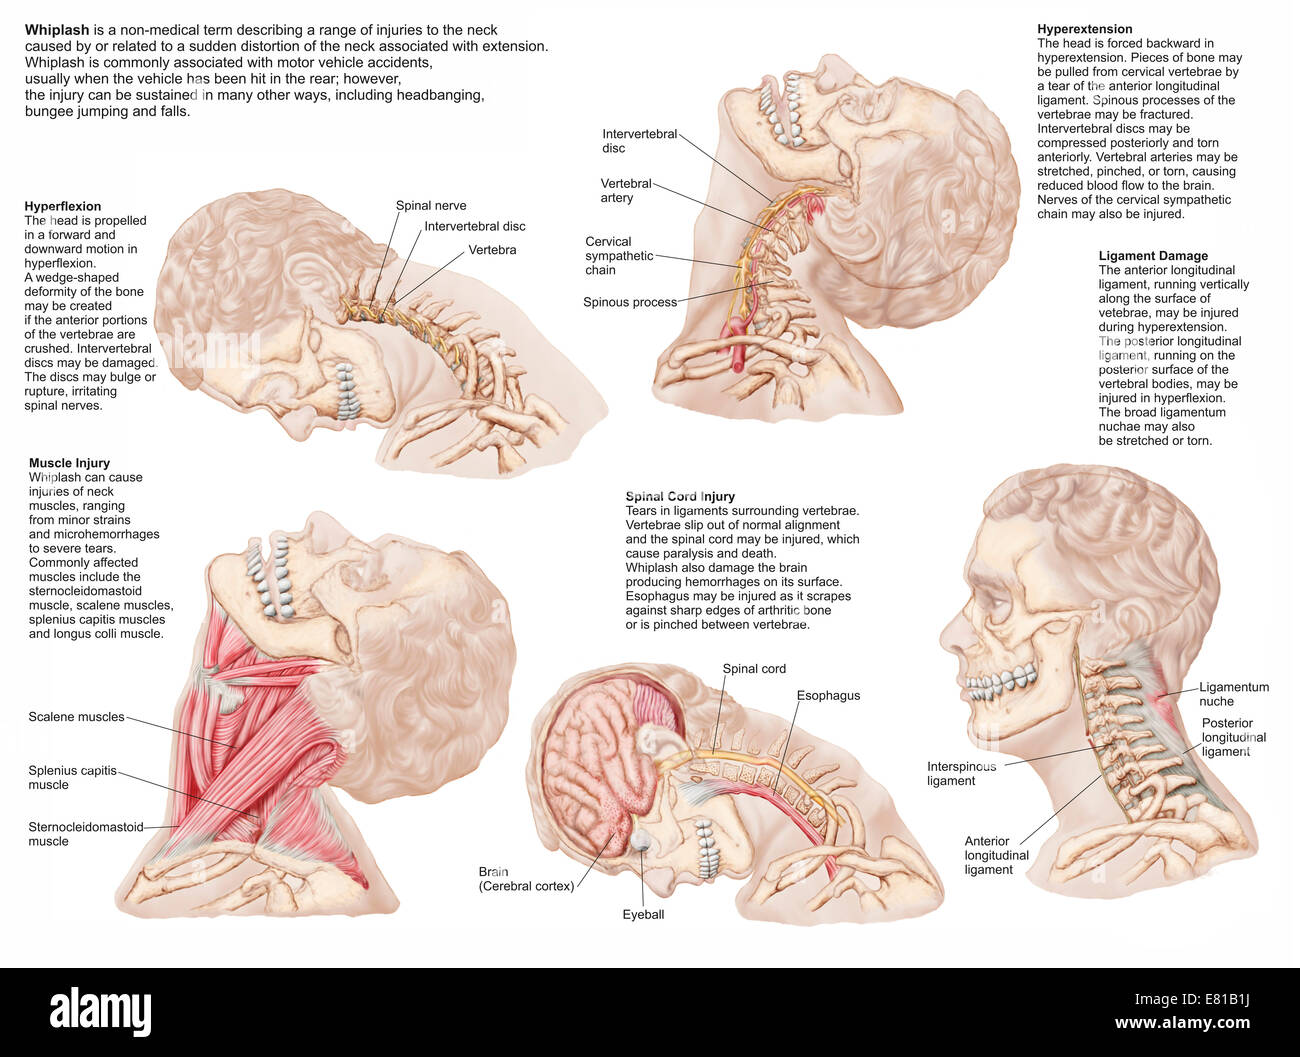 Medical chart showing the range of injuries to the human neck caused by whiplash. Stock Photo